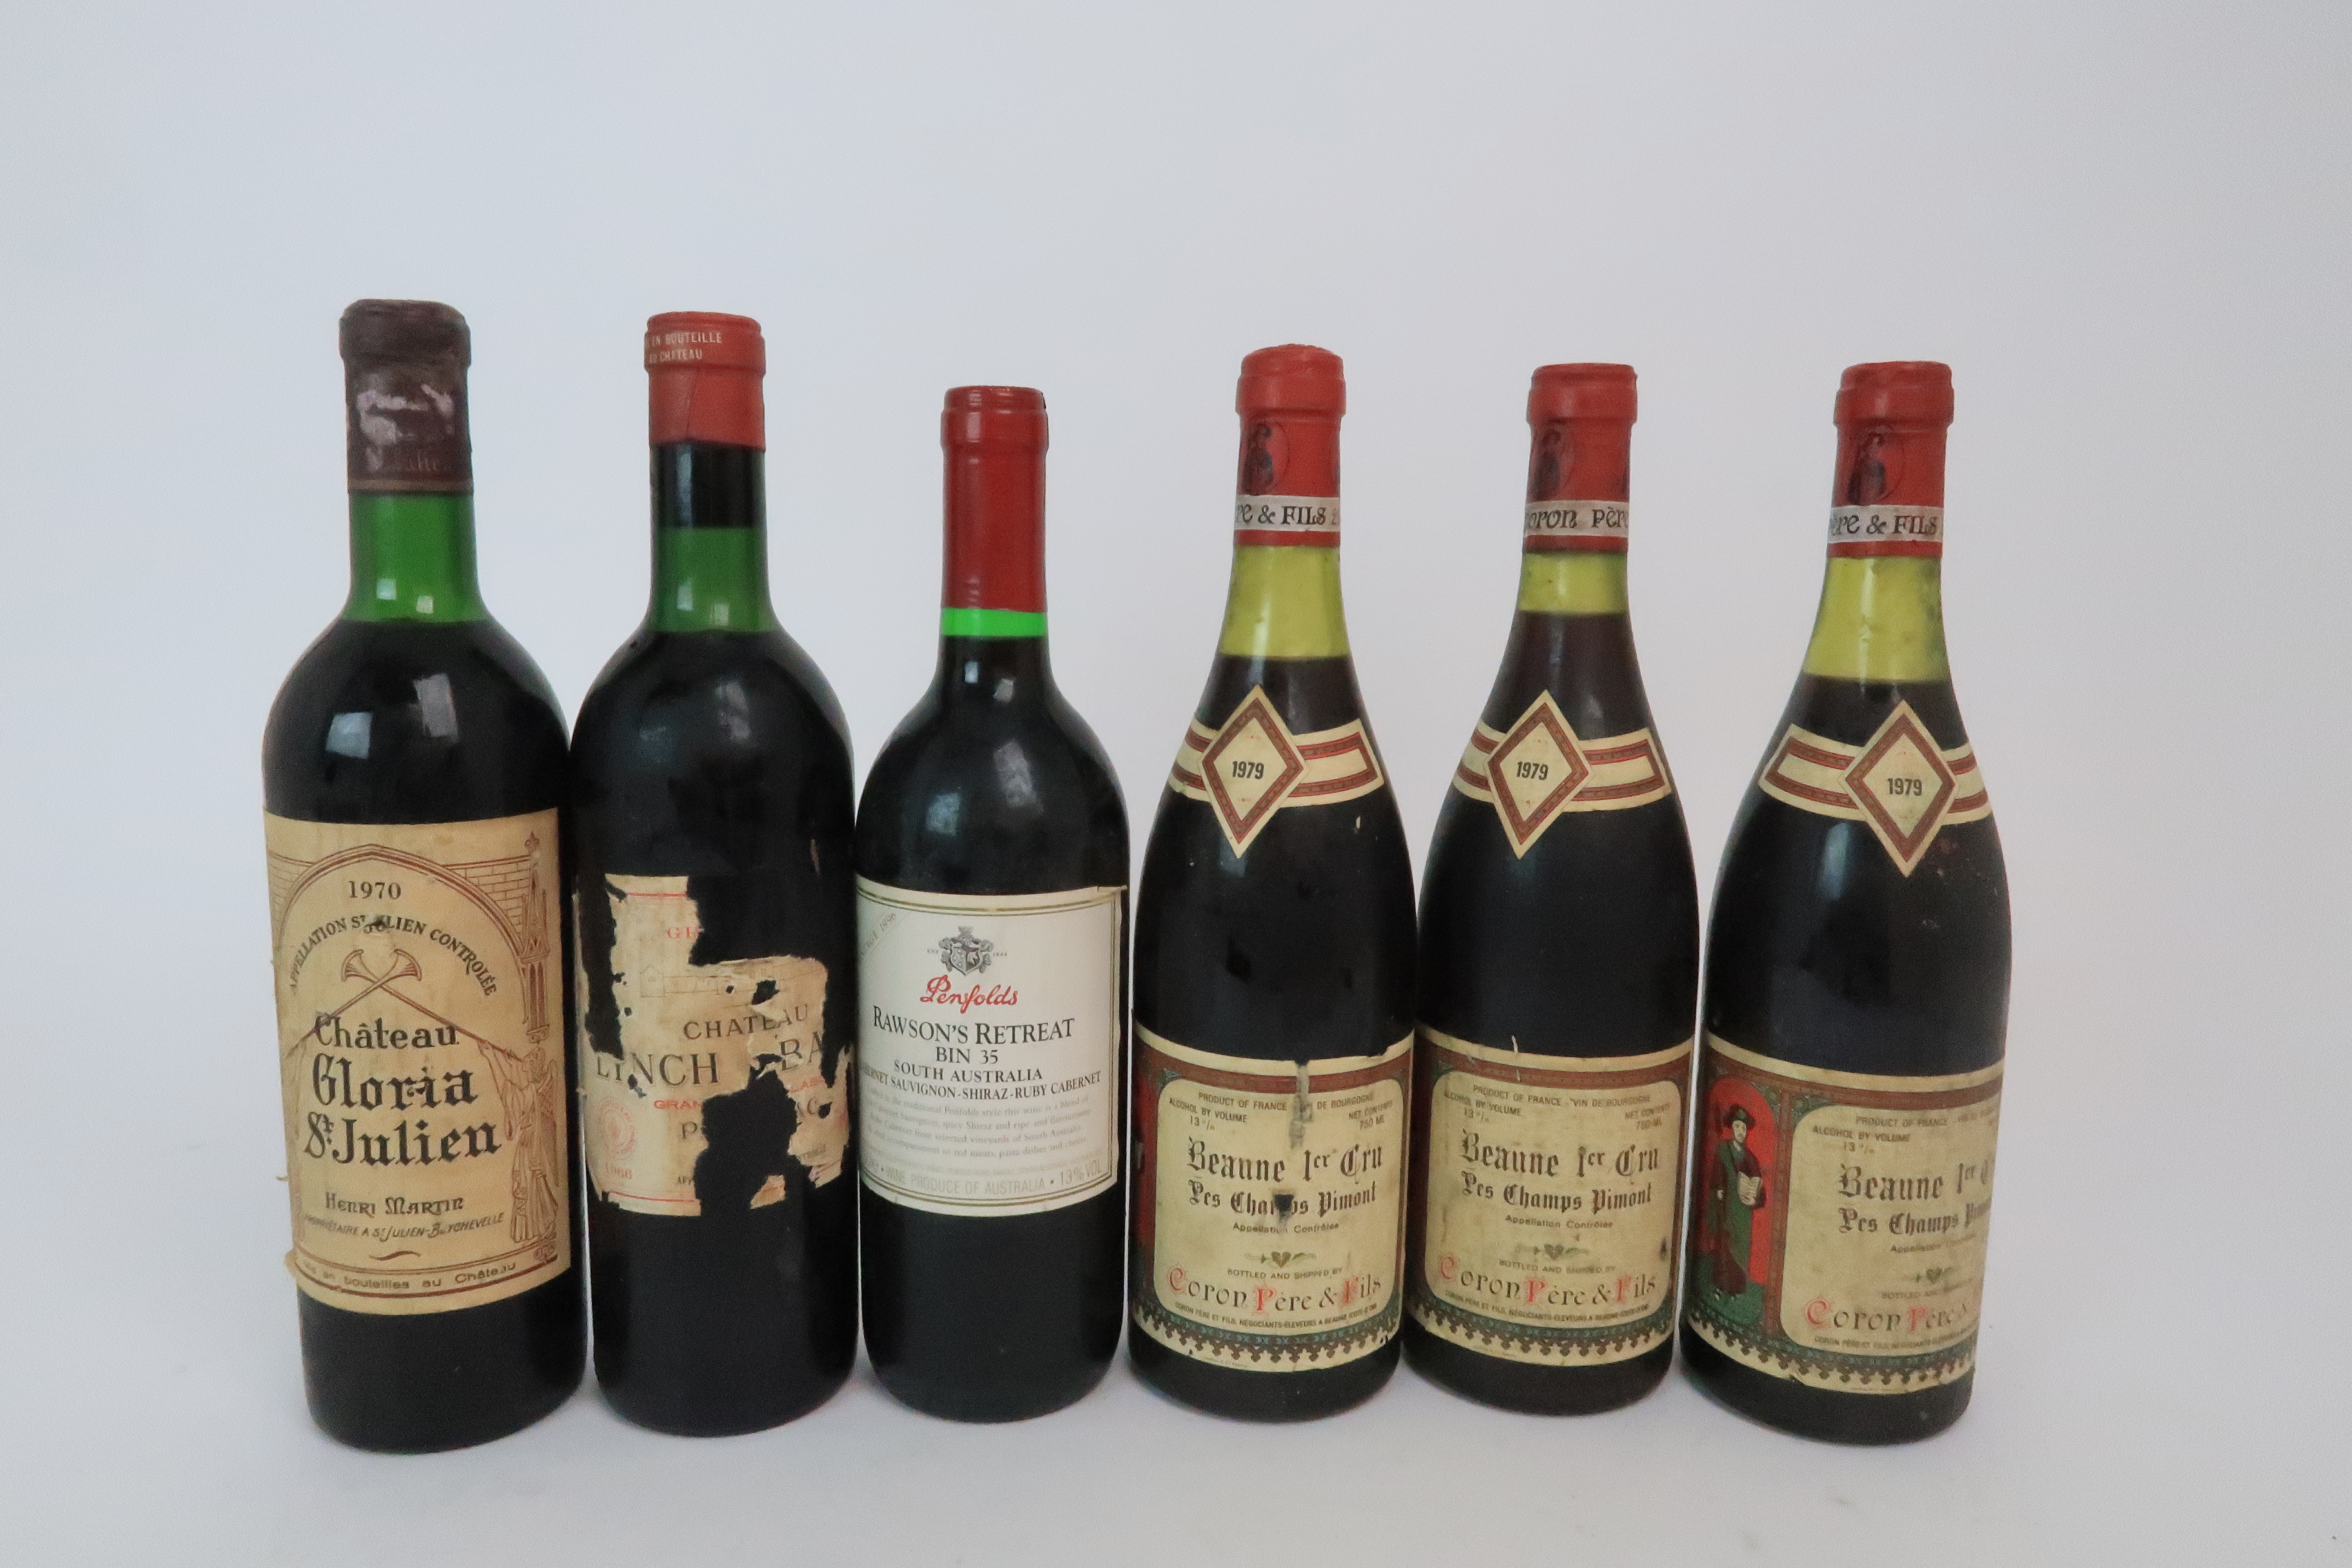 A BOTTLES OF CHATEAU LYNCH BAGES, 1966 label poor, Chateau Gloria St Julien, 1970 and three